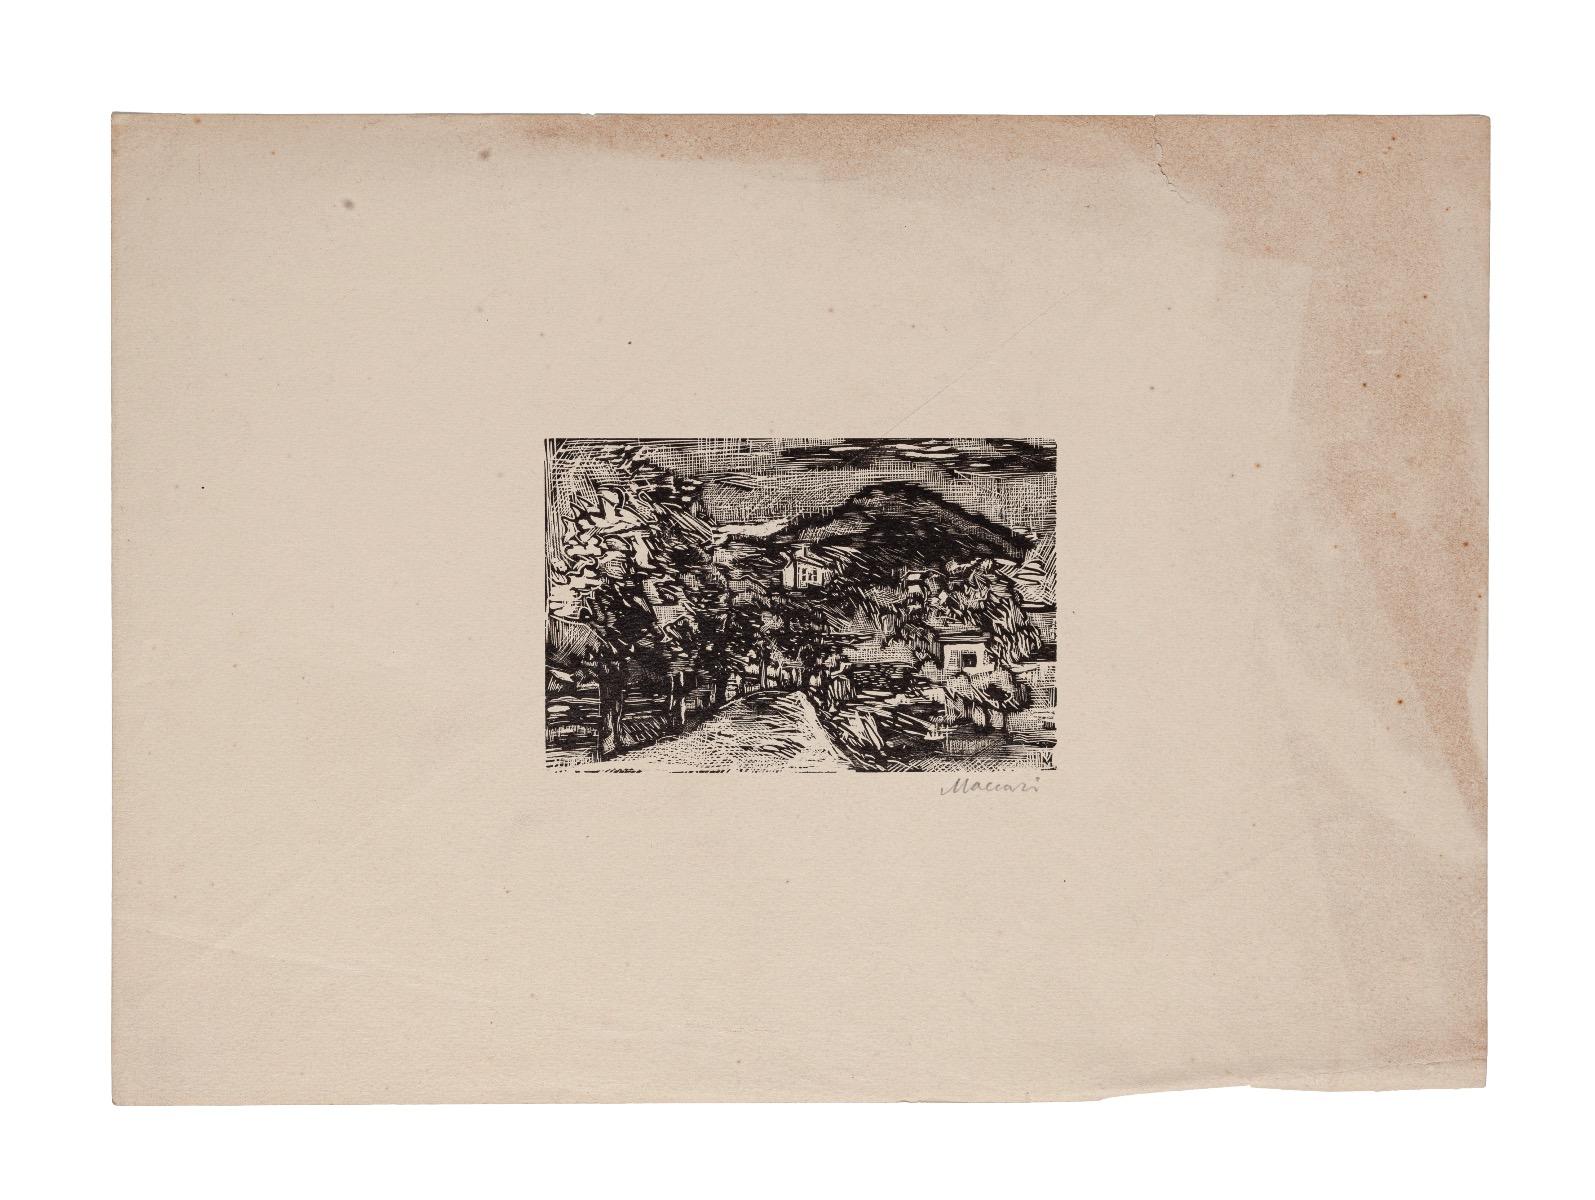 Landscape is an original modern artwork realized by the Italian artist Mino Maccari (Siena, 1898 - Rome, 1989).

Original woodcut on Ivory paper.  Hand signed lower right in pencil.

Excellent conditions..

Mino Maccari (Siena, 1898 – Rome, 1989).